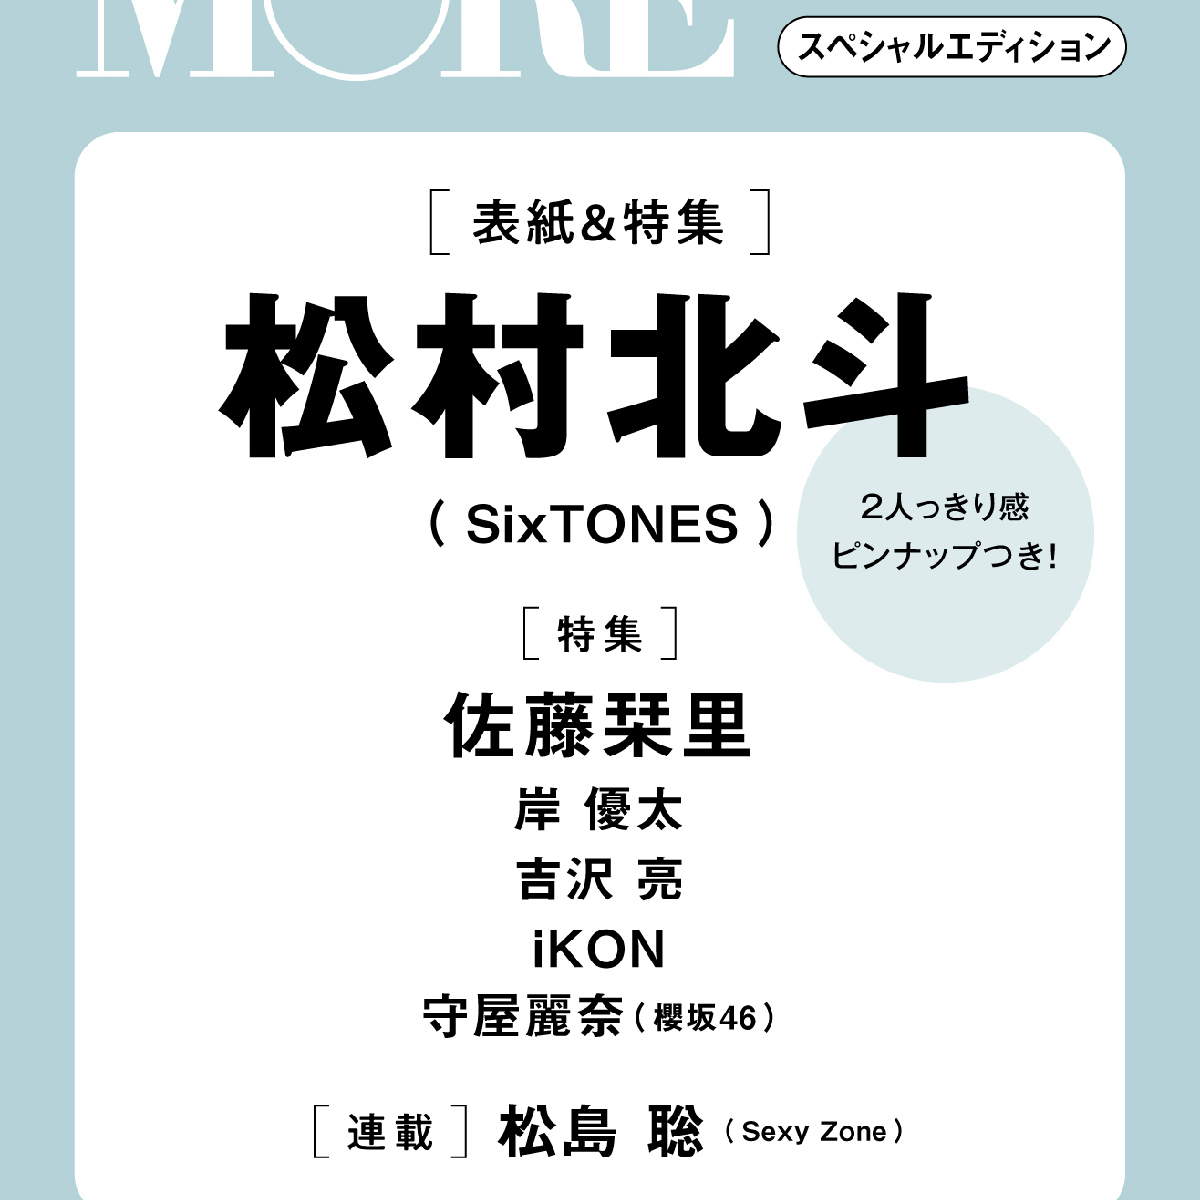 【For Hokuto Matsumura (SixTONES) fans！】We now offer shipping to customers in overseas! ＜MORE September issue, Hokuto　Matsumura　(SixTONES) appears on  special edition cover!＞　